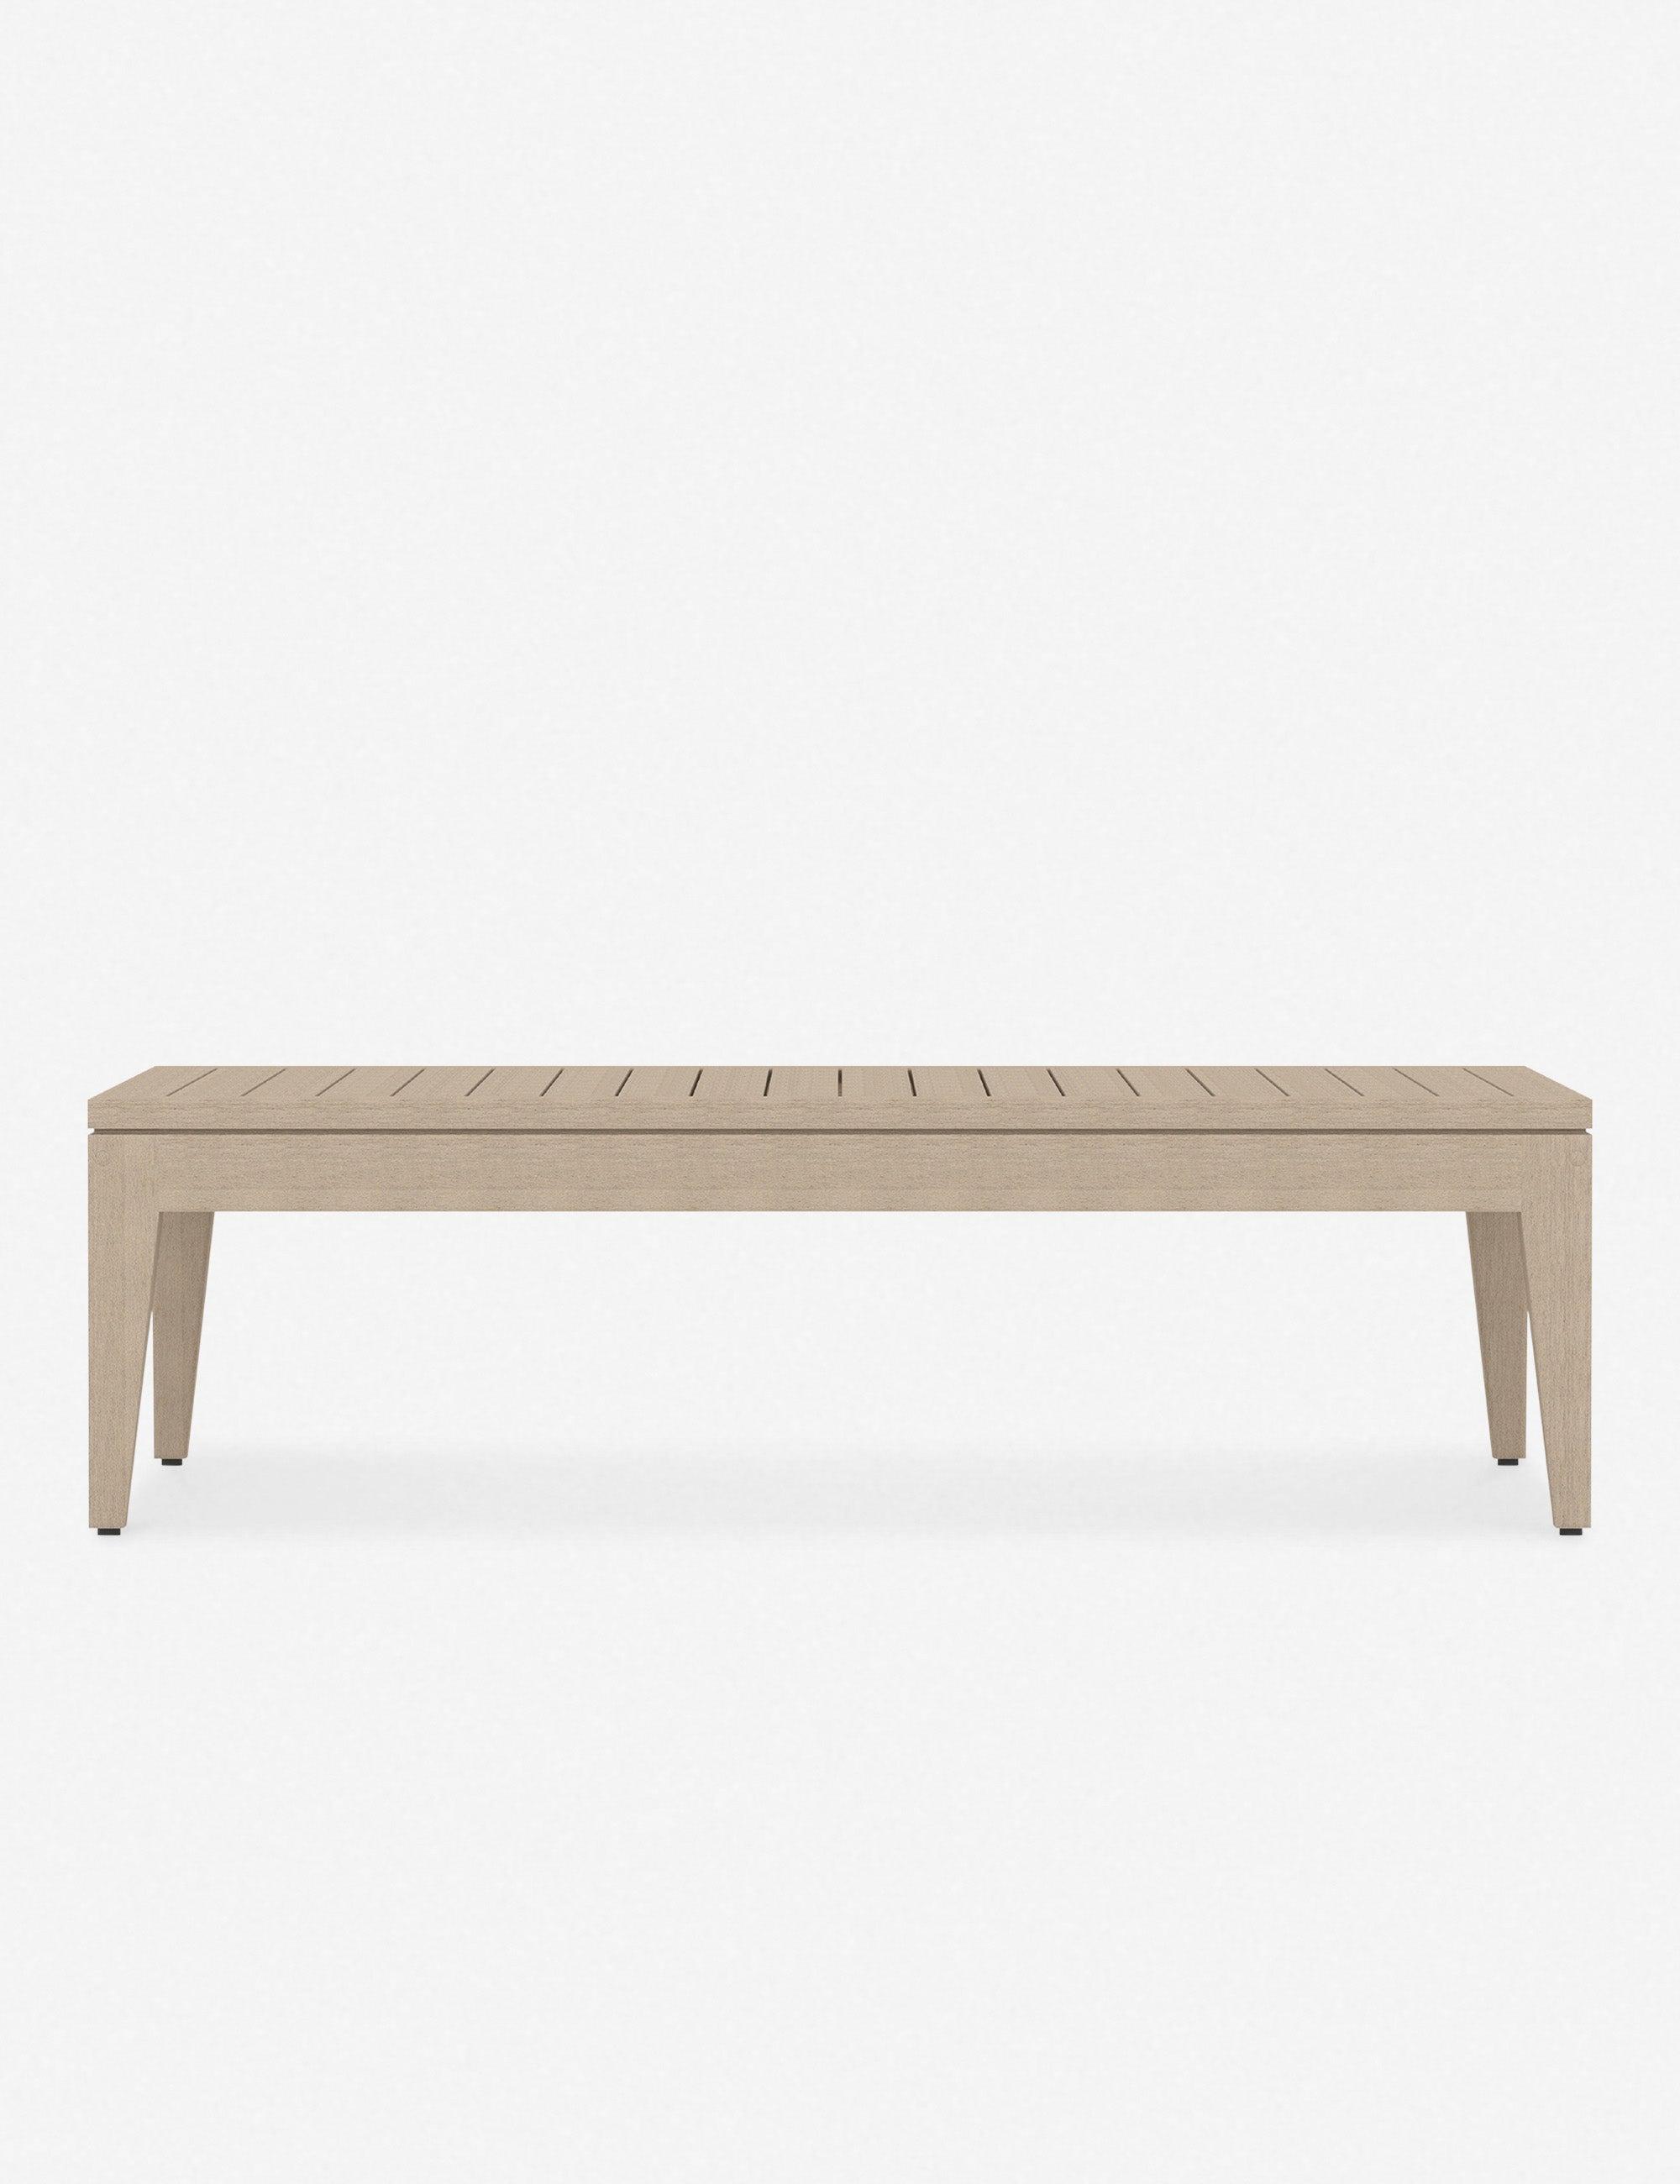 Sherwood Contemporary Teak Rectangular Coffee Table in Washed Brown